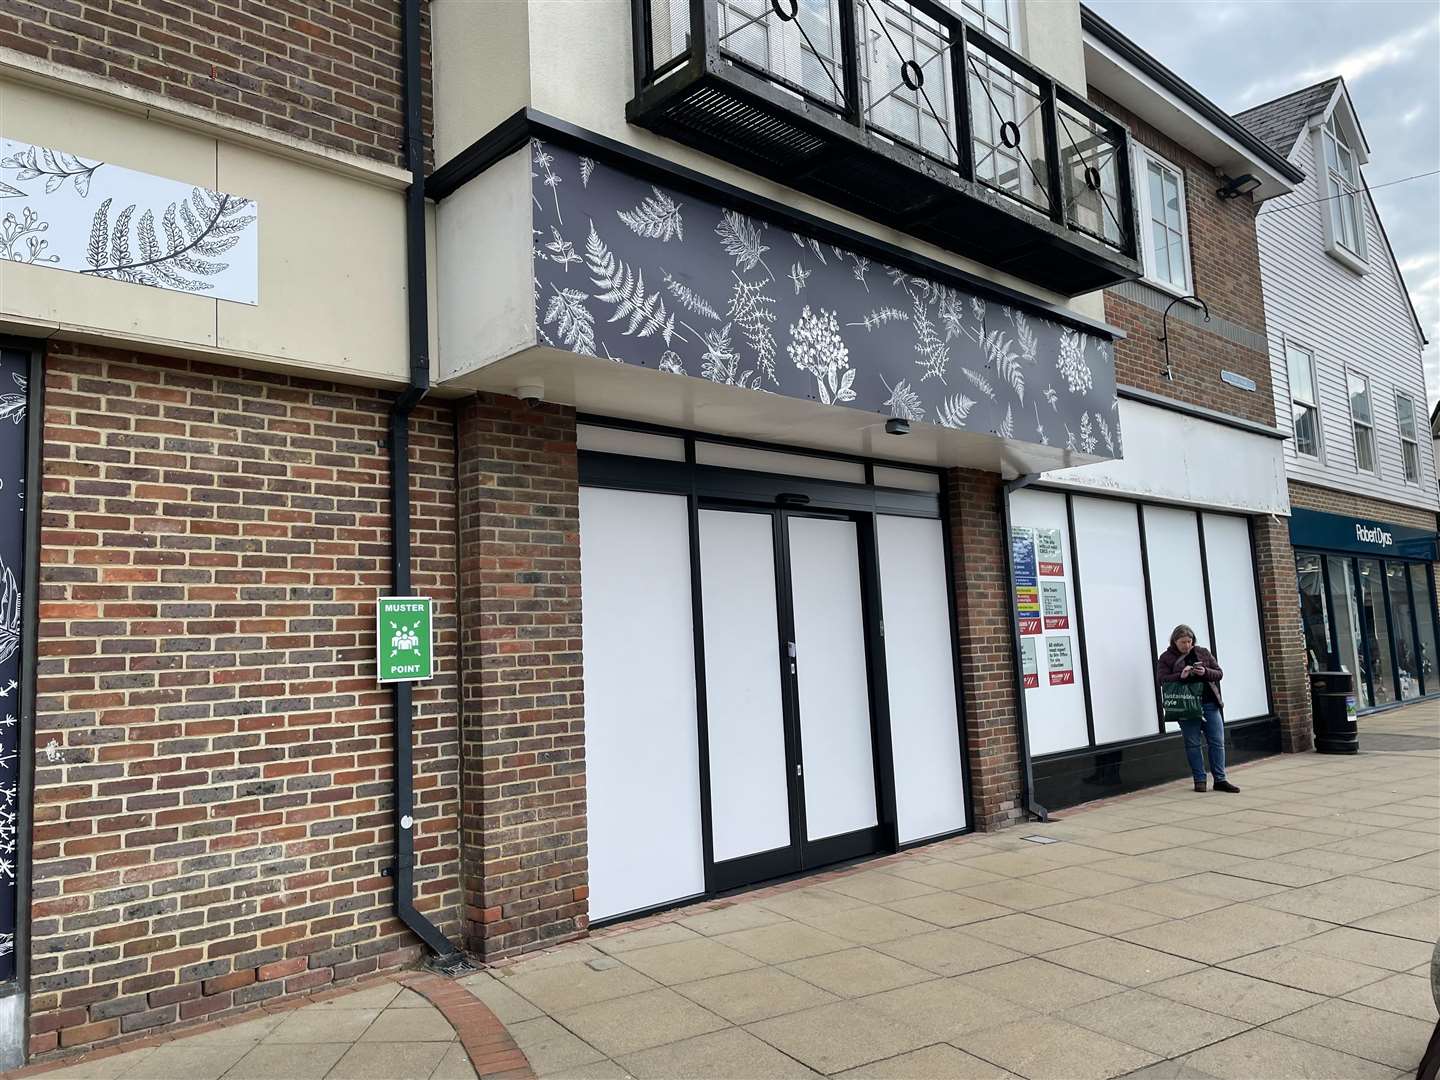 Amazon Fresh is expected to open in the former Baby Gap store in Sevenoaks